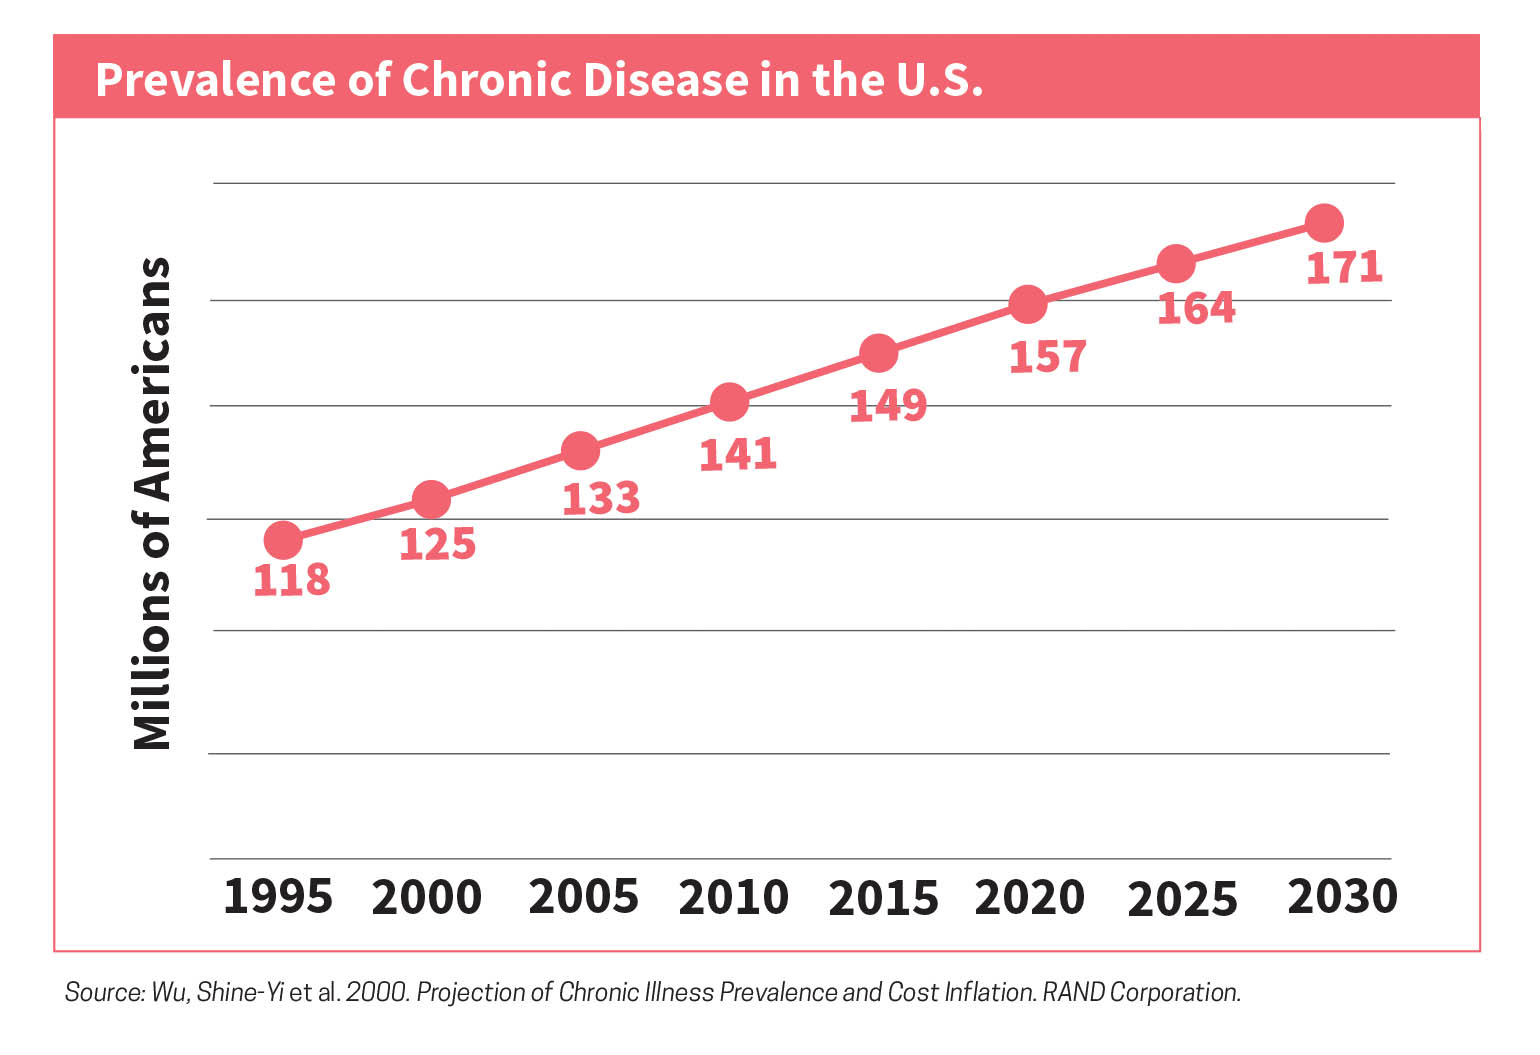 Prevalence of Chronic Disease in the U.S.